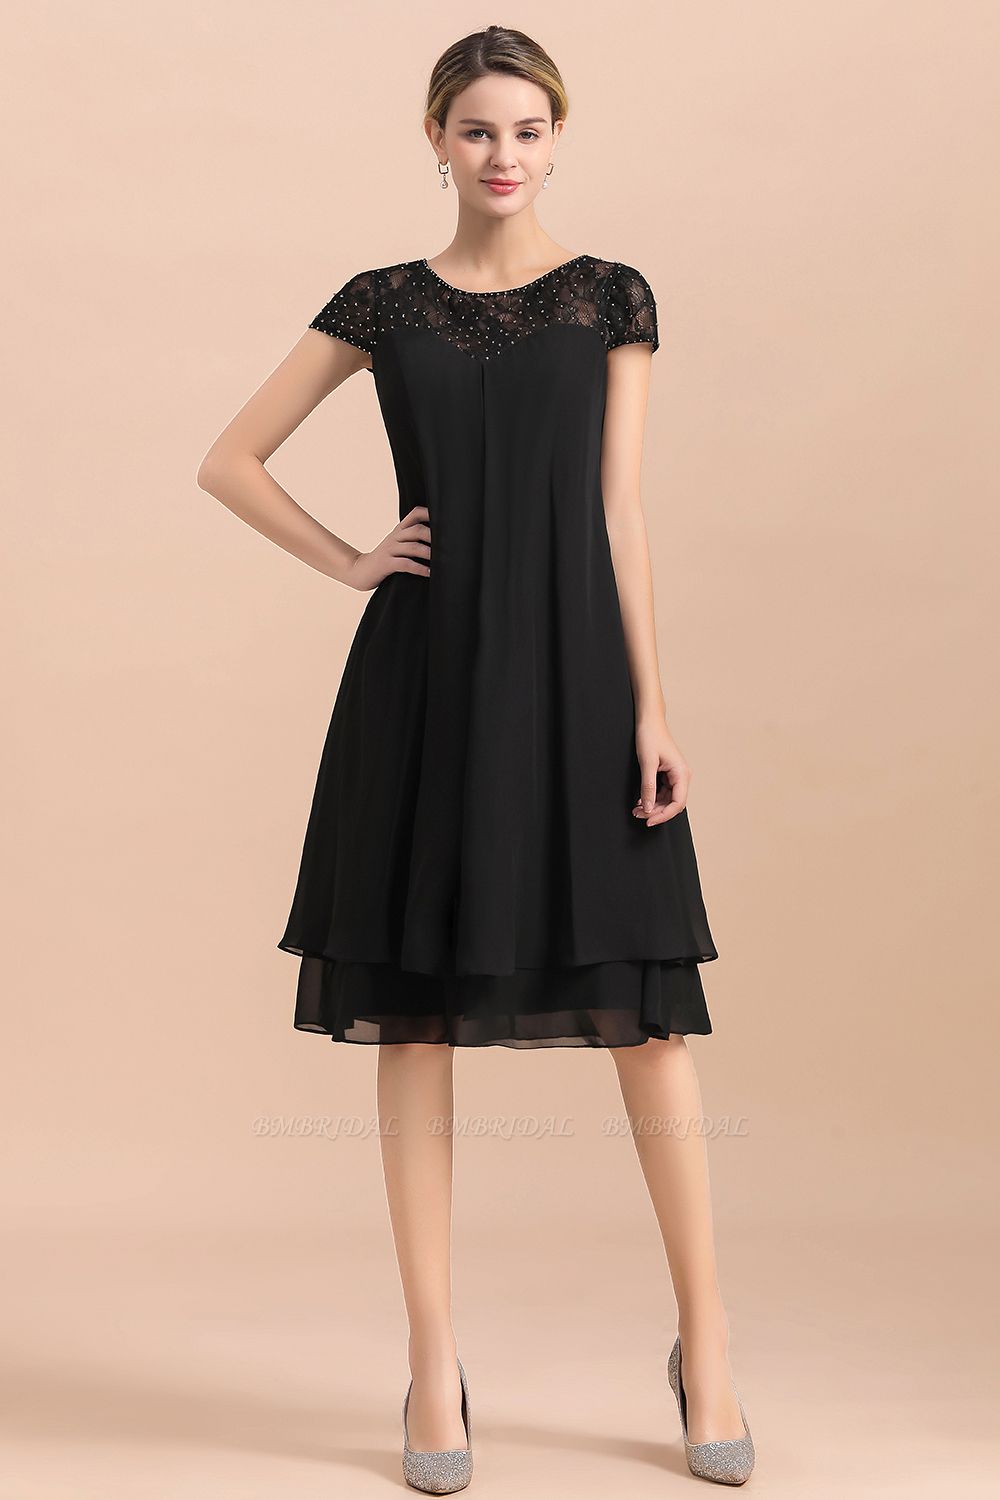 BMbridal Chic Black Cap Sleeve Mother of Bride Dress Chiffon Short Wedding Party Gowns